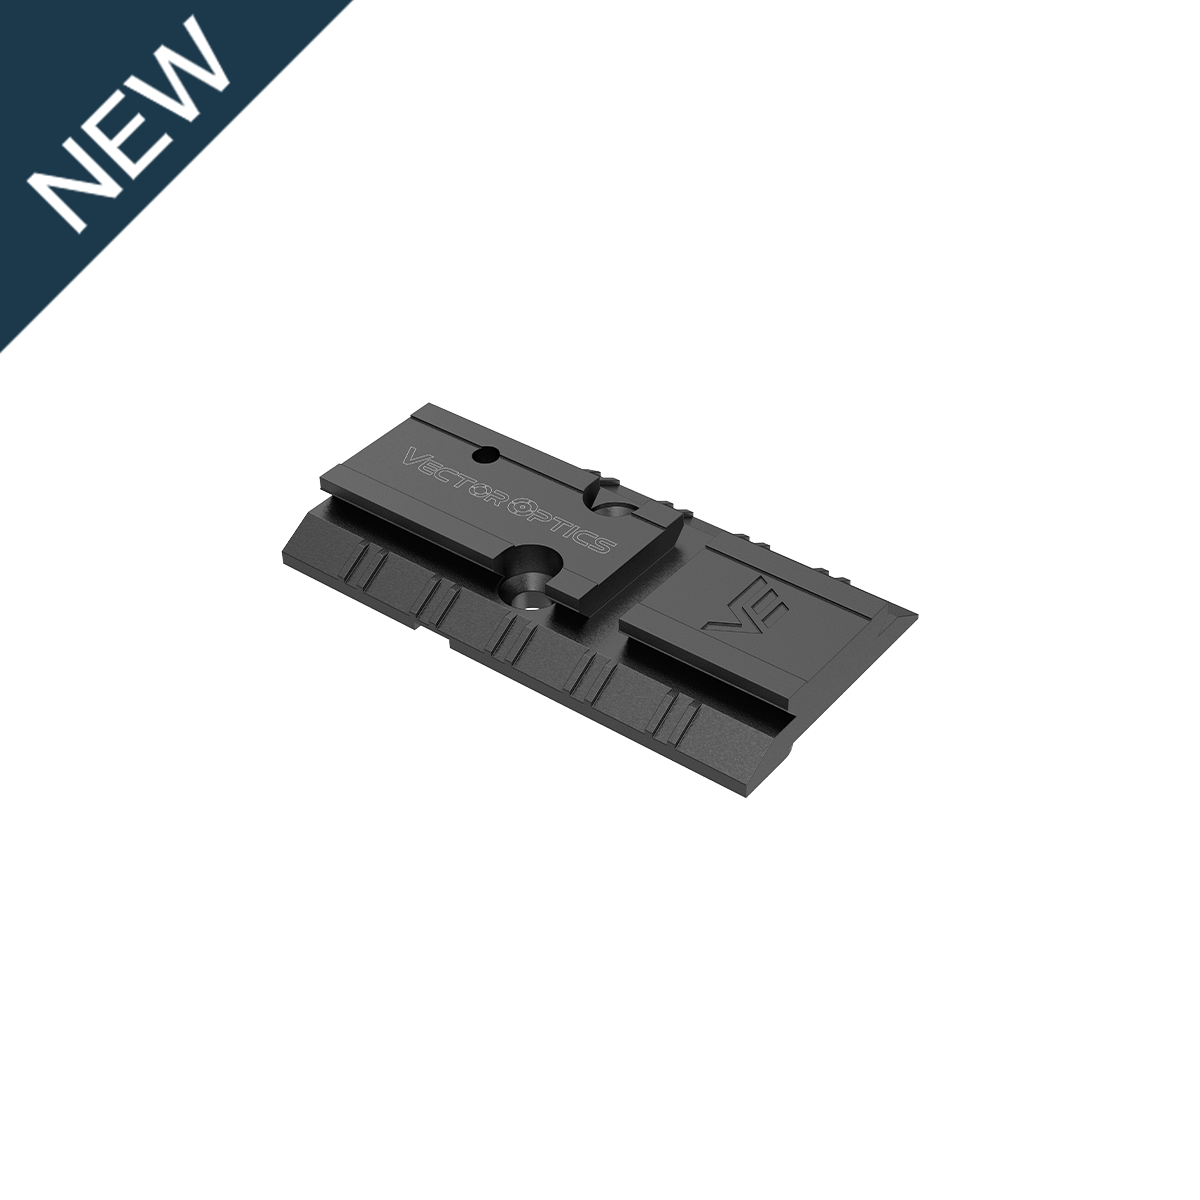 Enclosed Red Dot Sight CZ Shadow 2 VOD Adapter